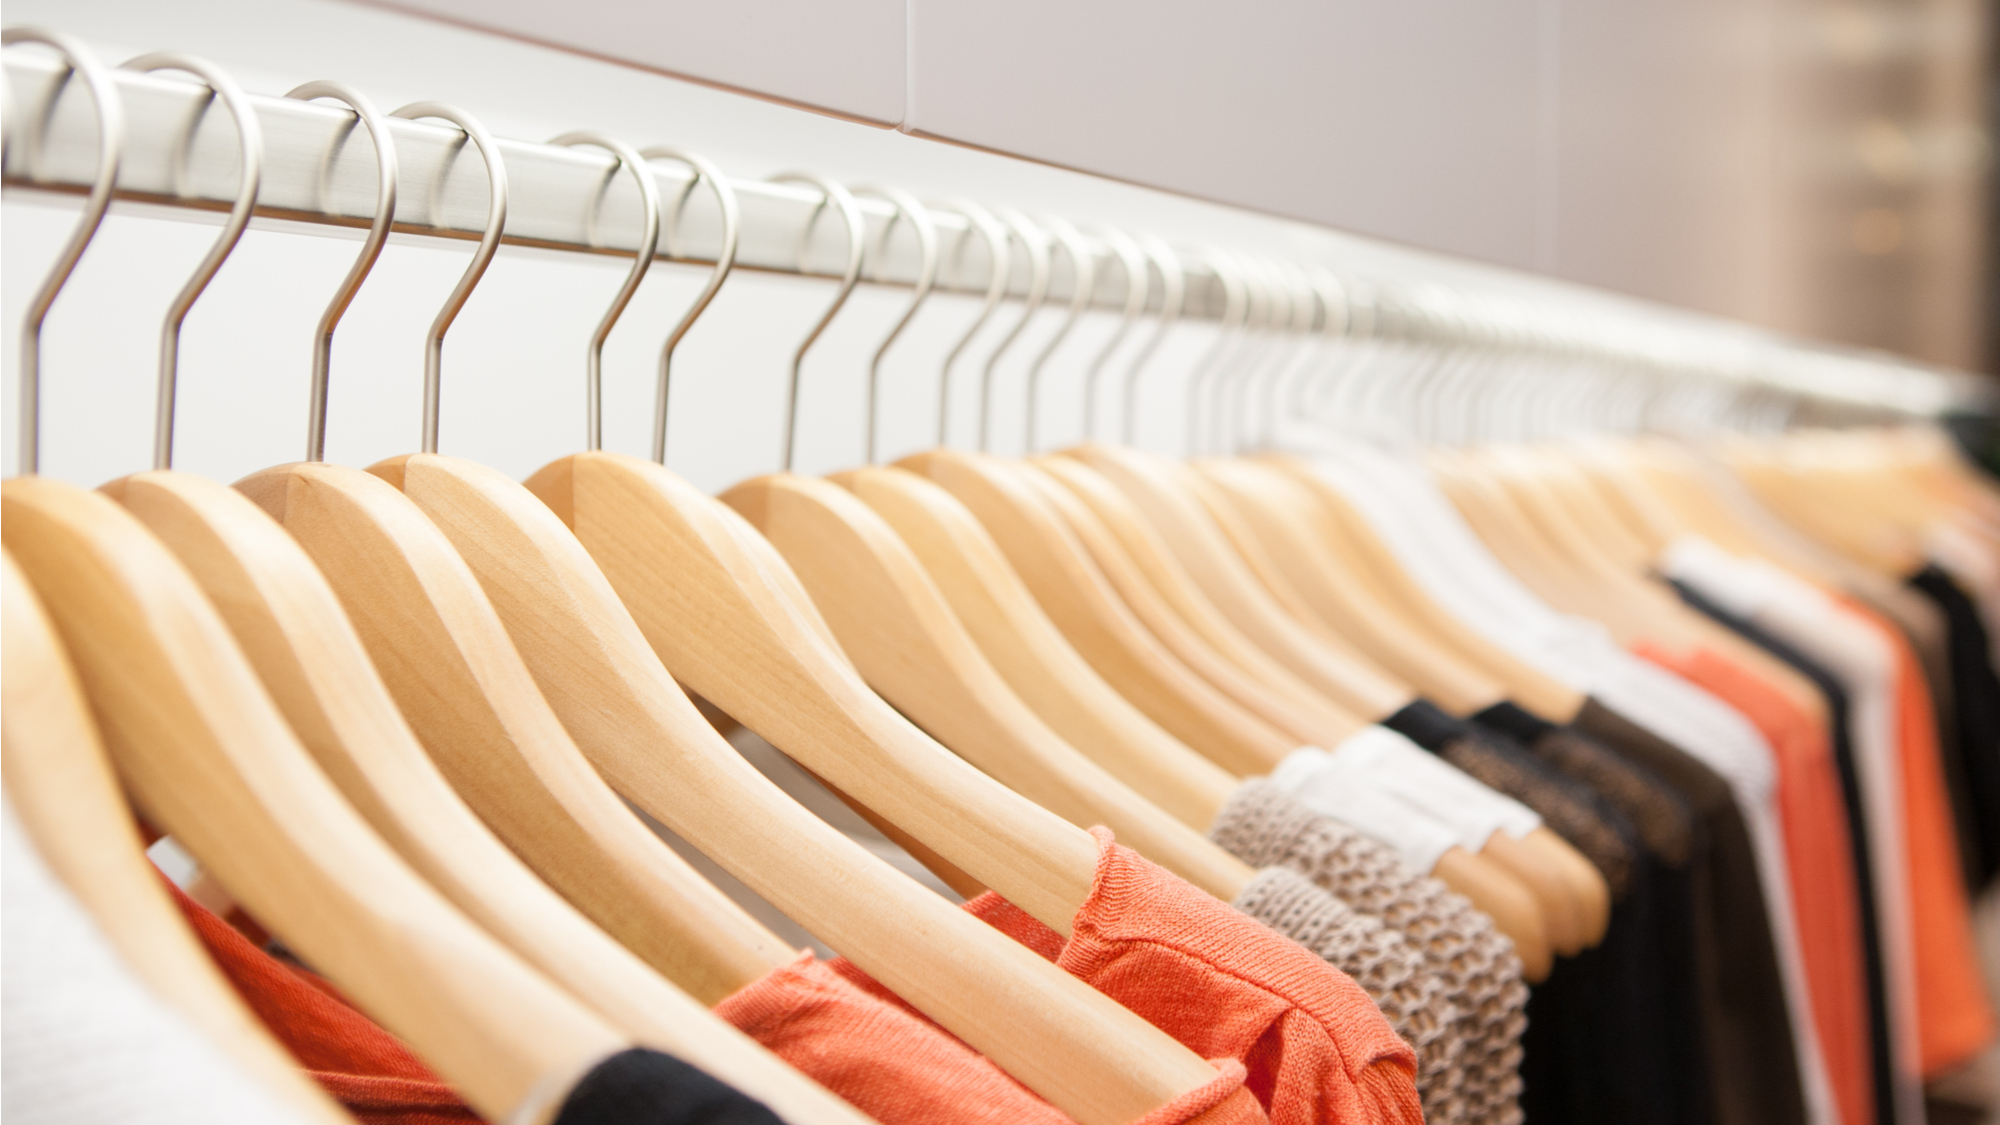 How To Stop Wasting Money On Clothes